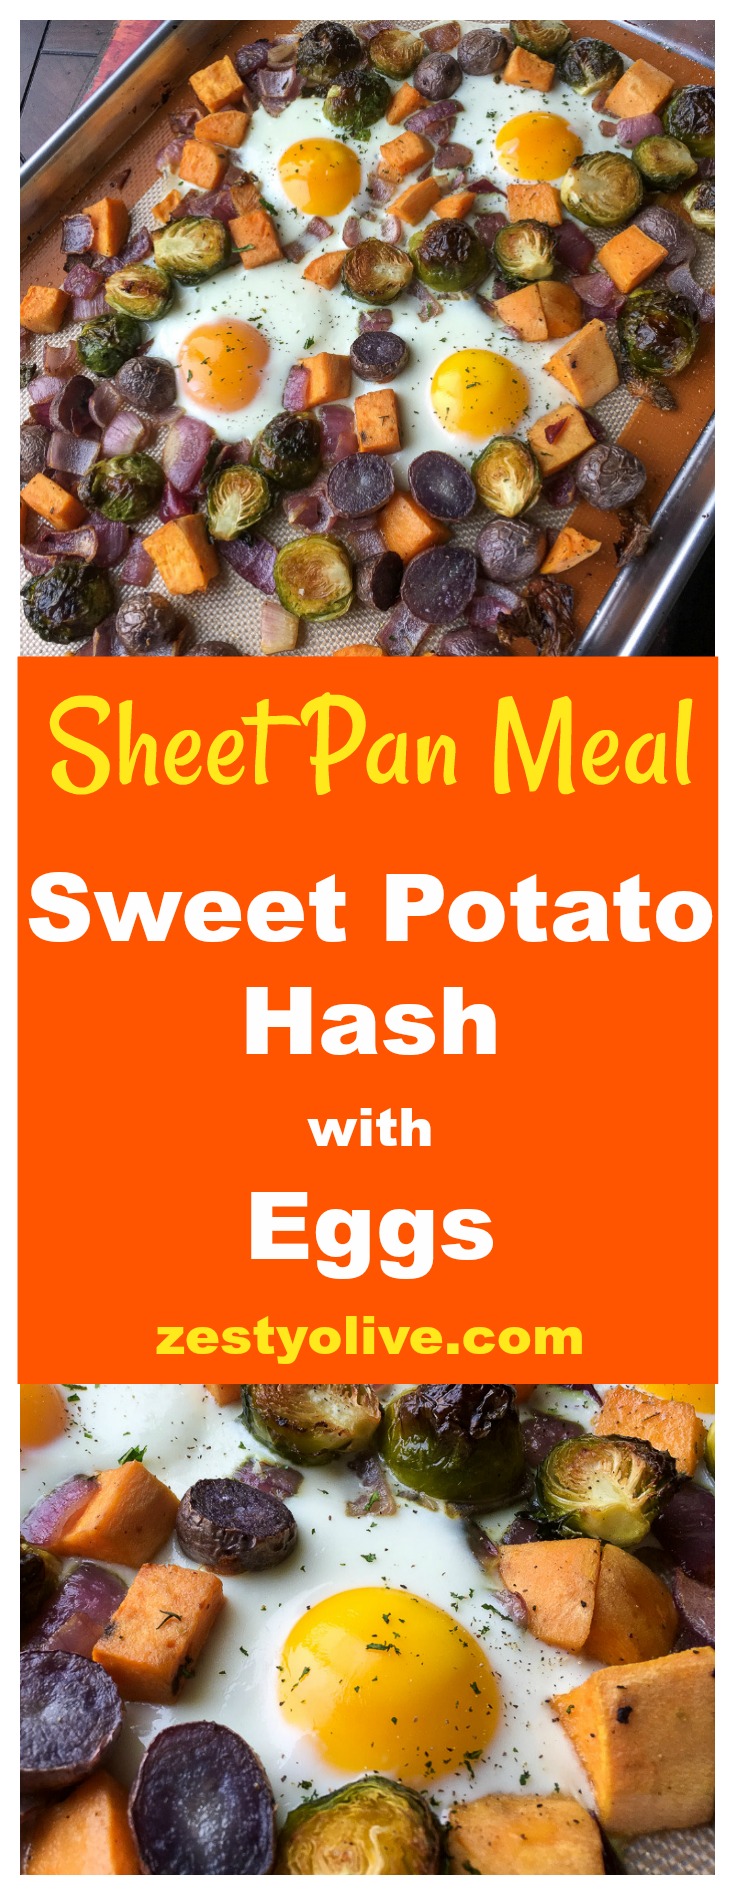 Sheet pan meals are a time saver and this Sheet Pan Sweet Potato Hash With Eggs recipe is no exception. This is a savory twist on the classic eggs and potatoes bake, perfect for breakfast or dinner.